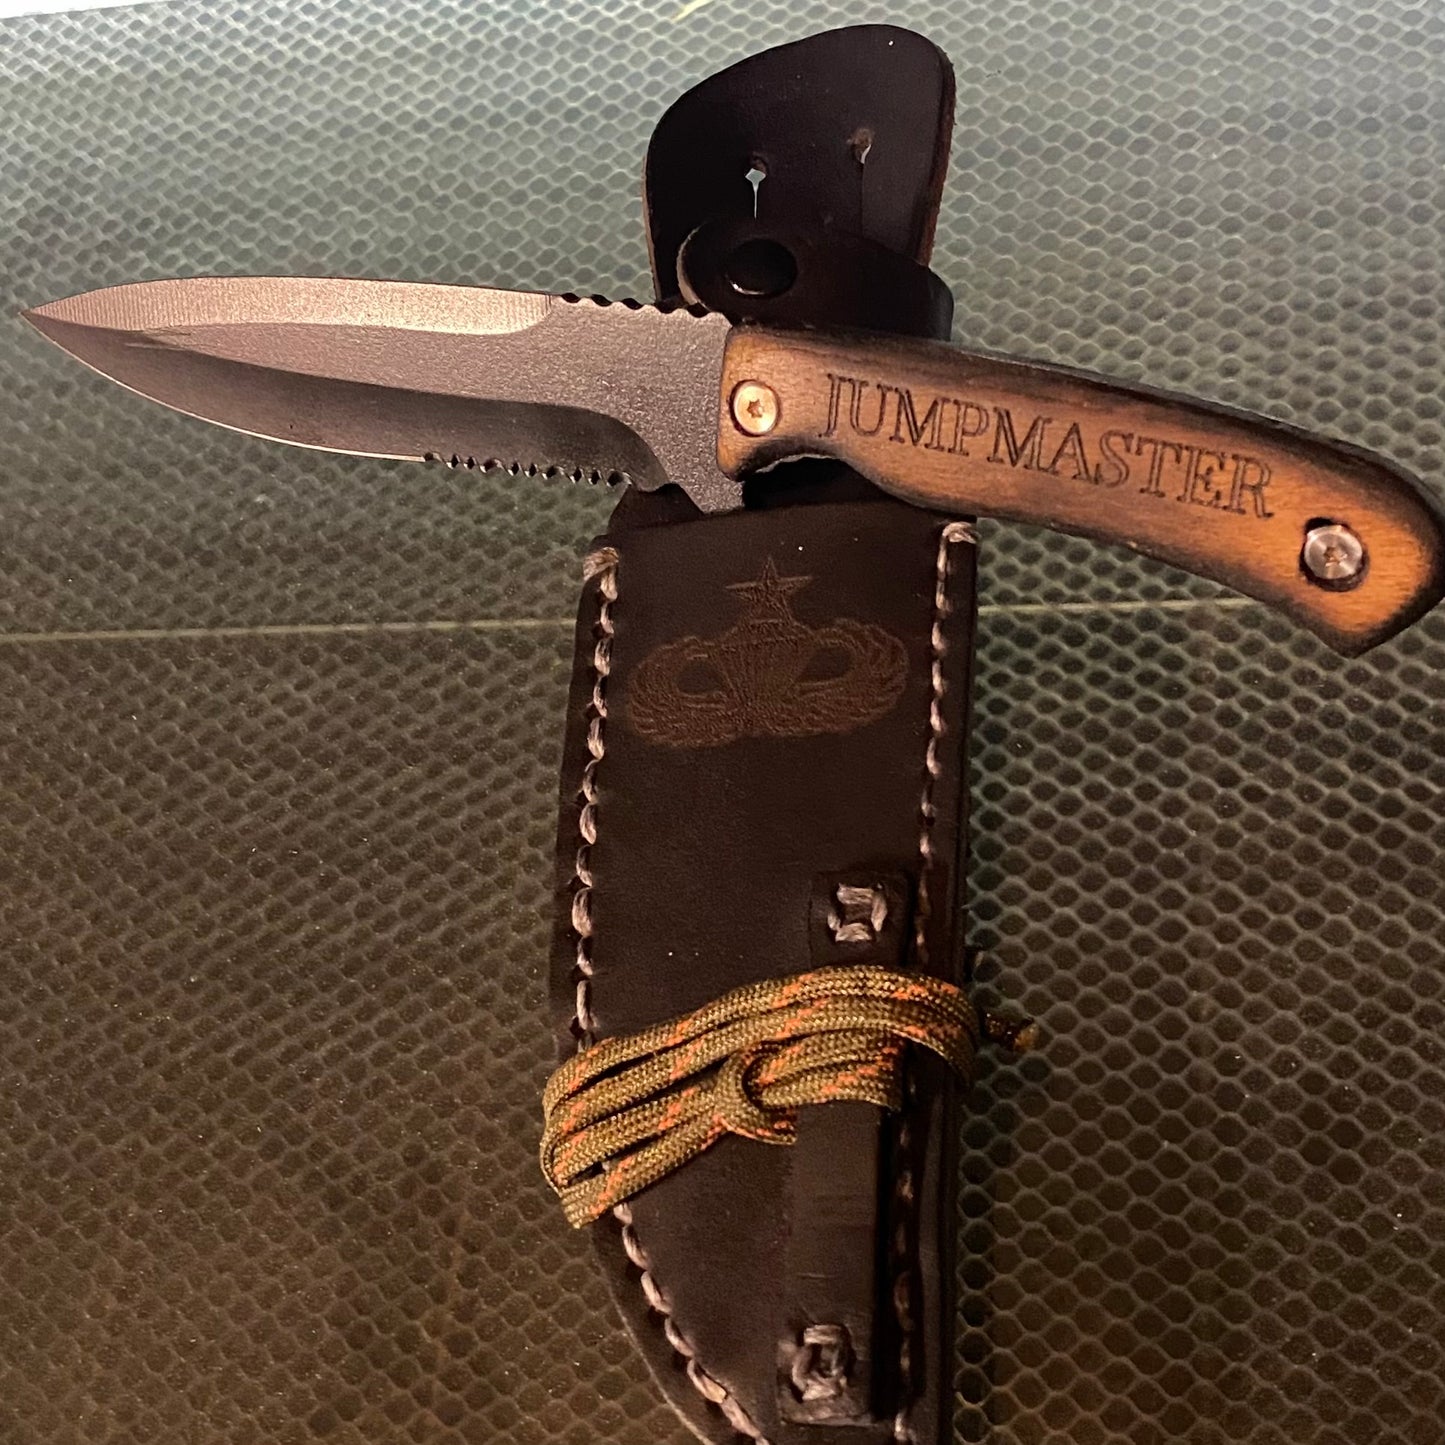 The Jumpmaster knife was developed for use by military jumpmaster personnel as an emergency cutting tool. This knife is custom made; you won't find any other knife like it. It measures in at 10 inches total length with a 6-inch blade. Designed to be lightweight, stylish and effective. Each knife is custom made